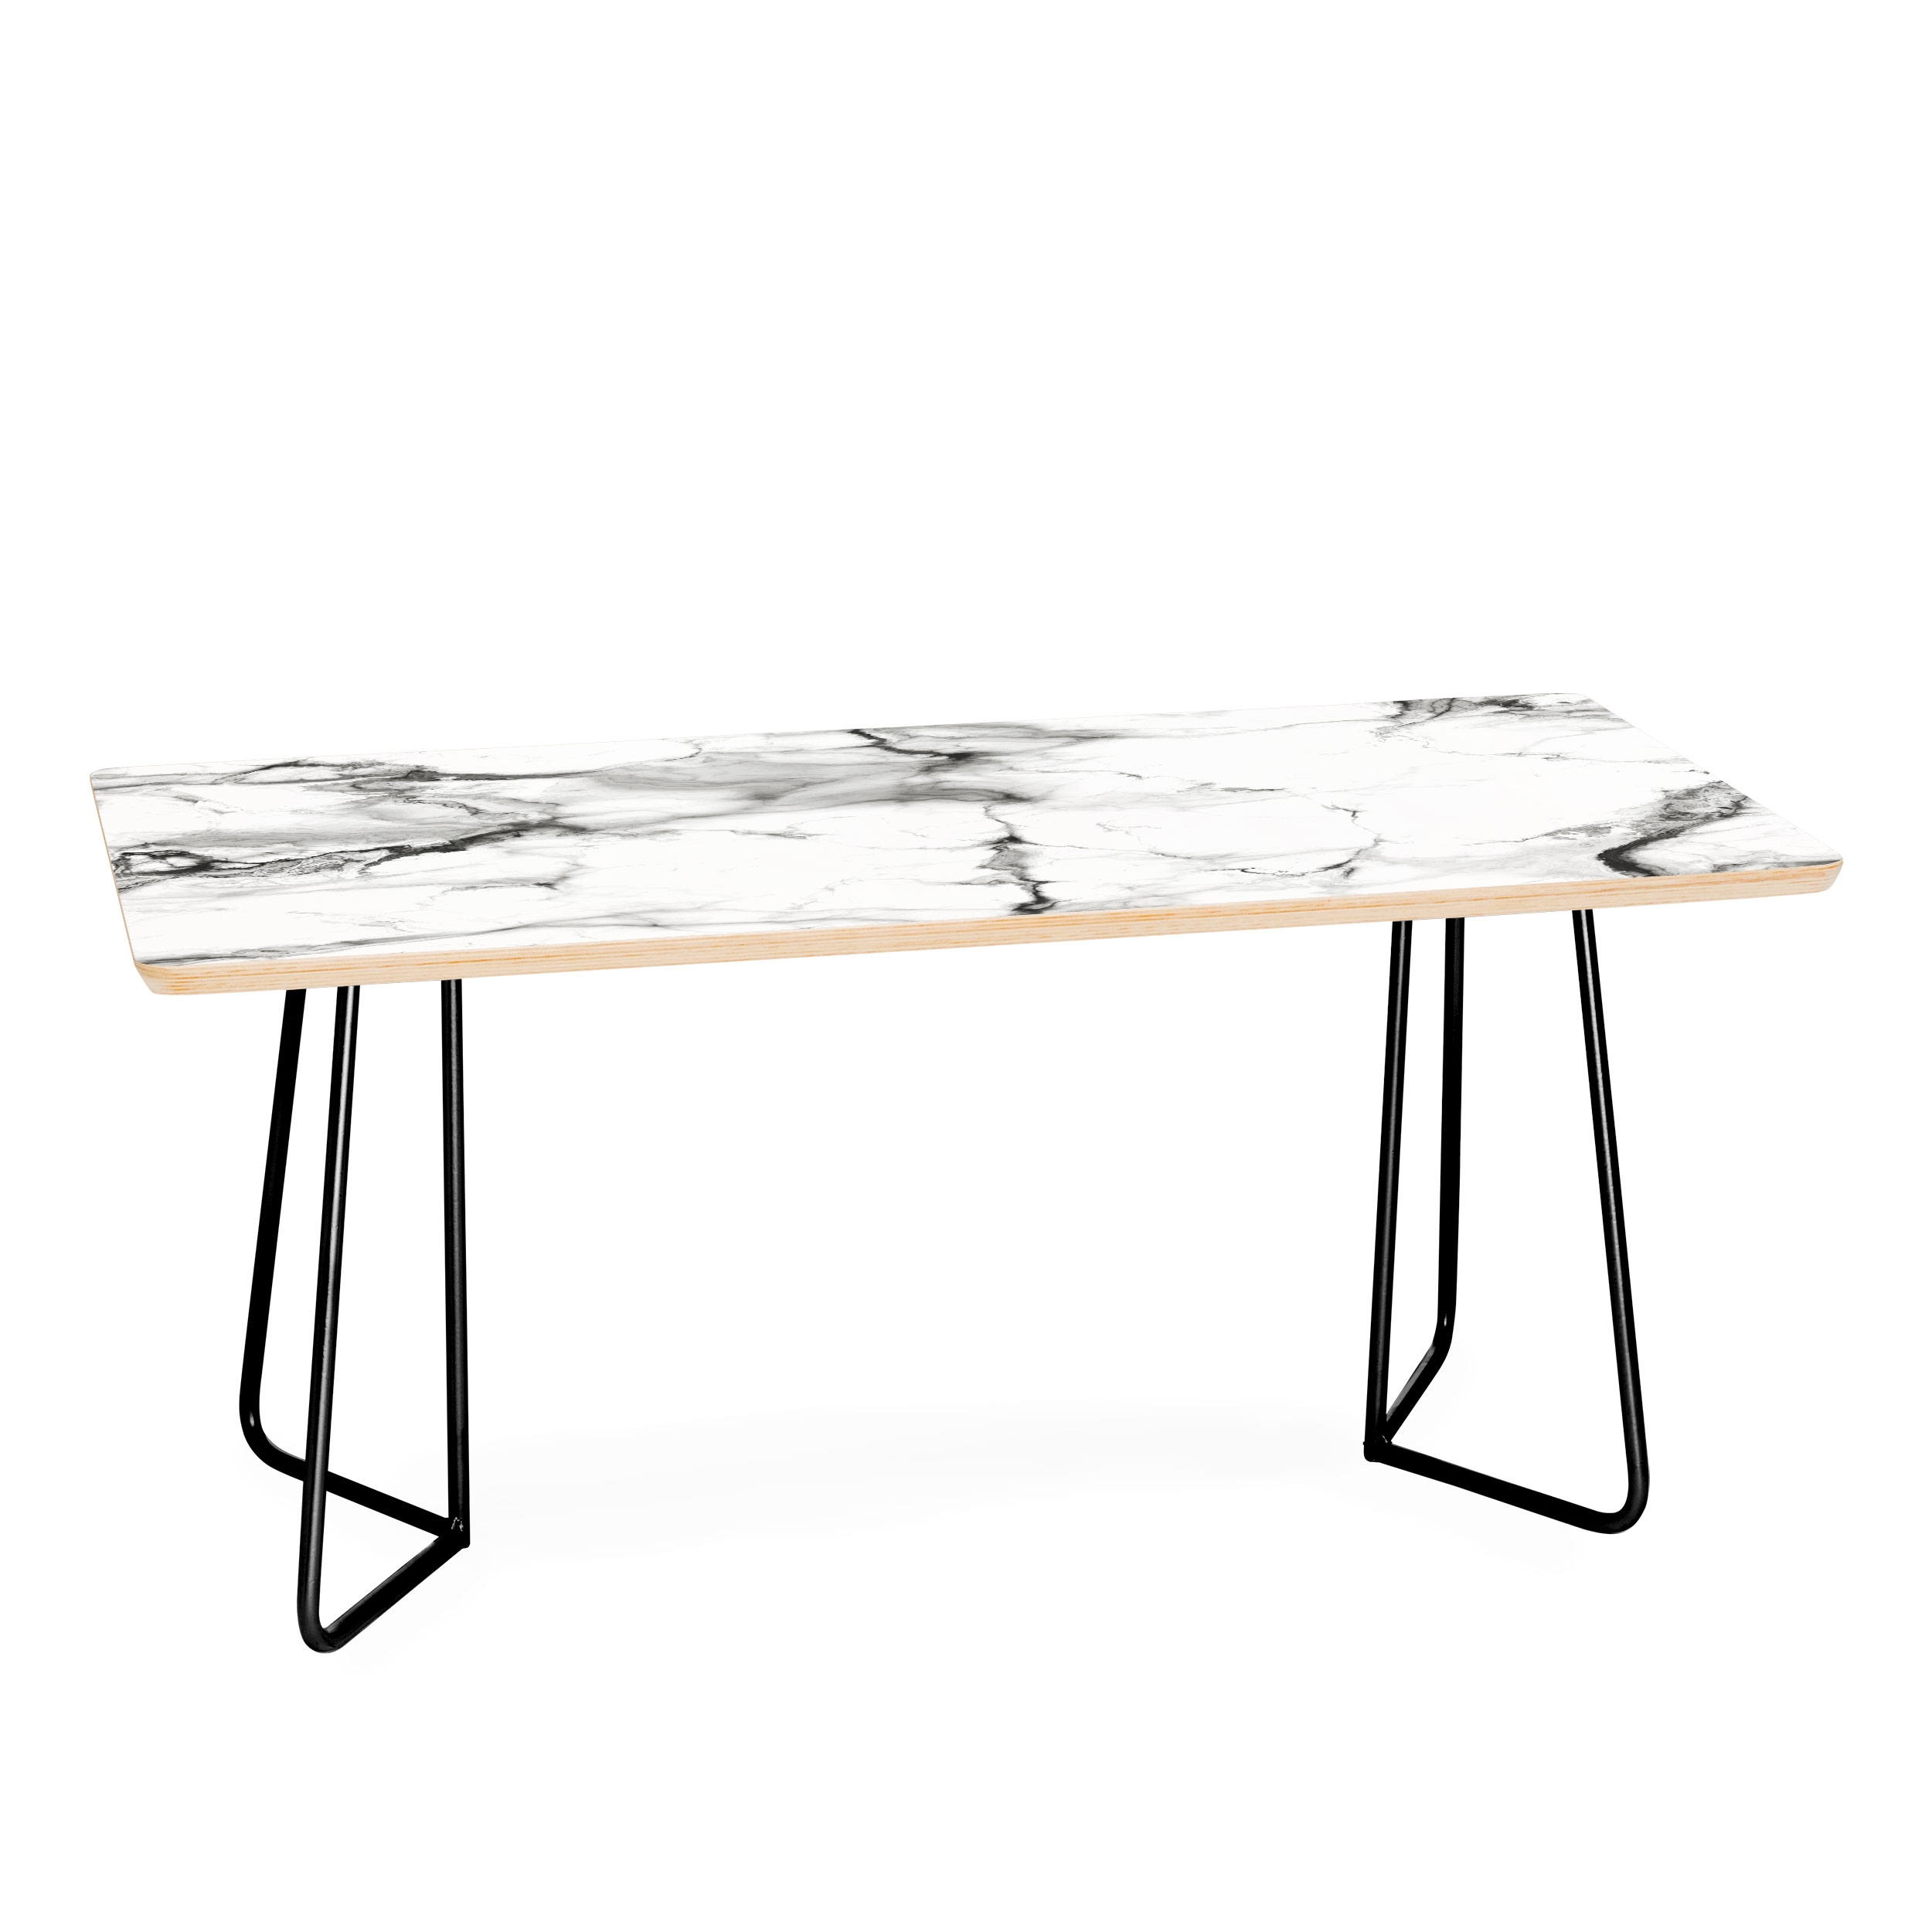 Marble by Chelsea Victoria - Coffee Table Black Aston Legs - Image 1